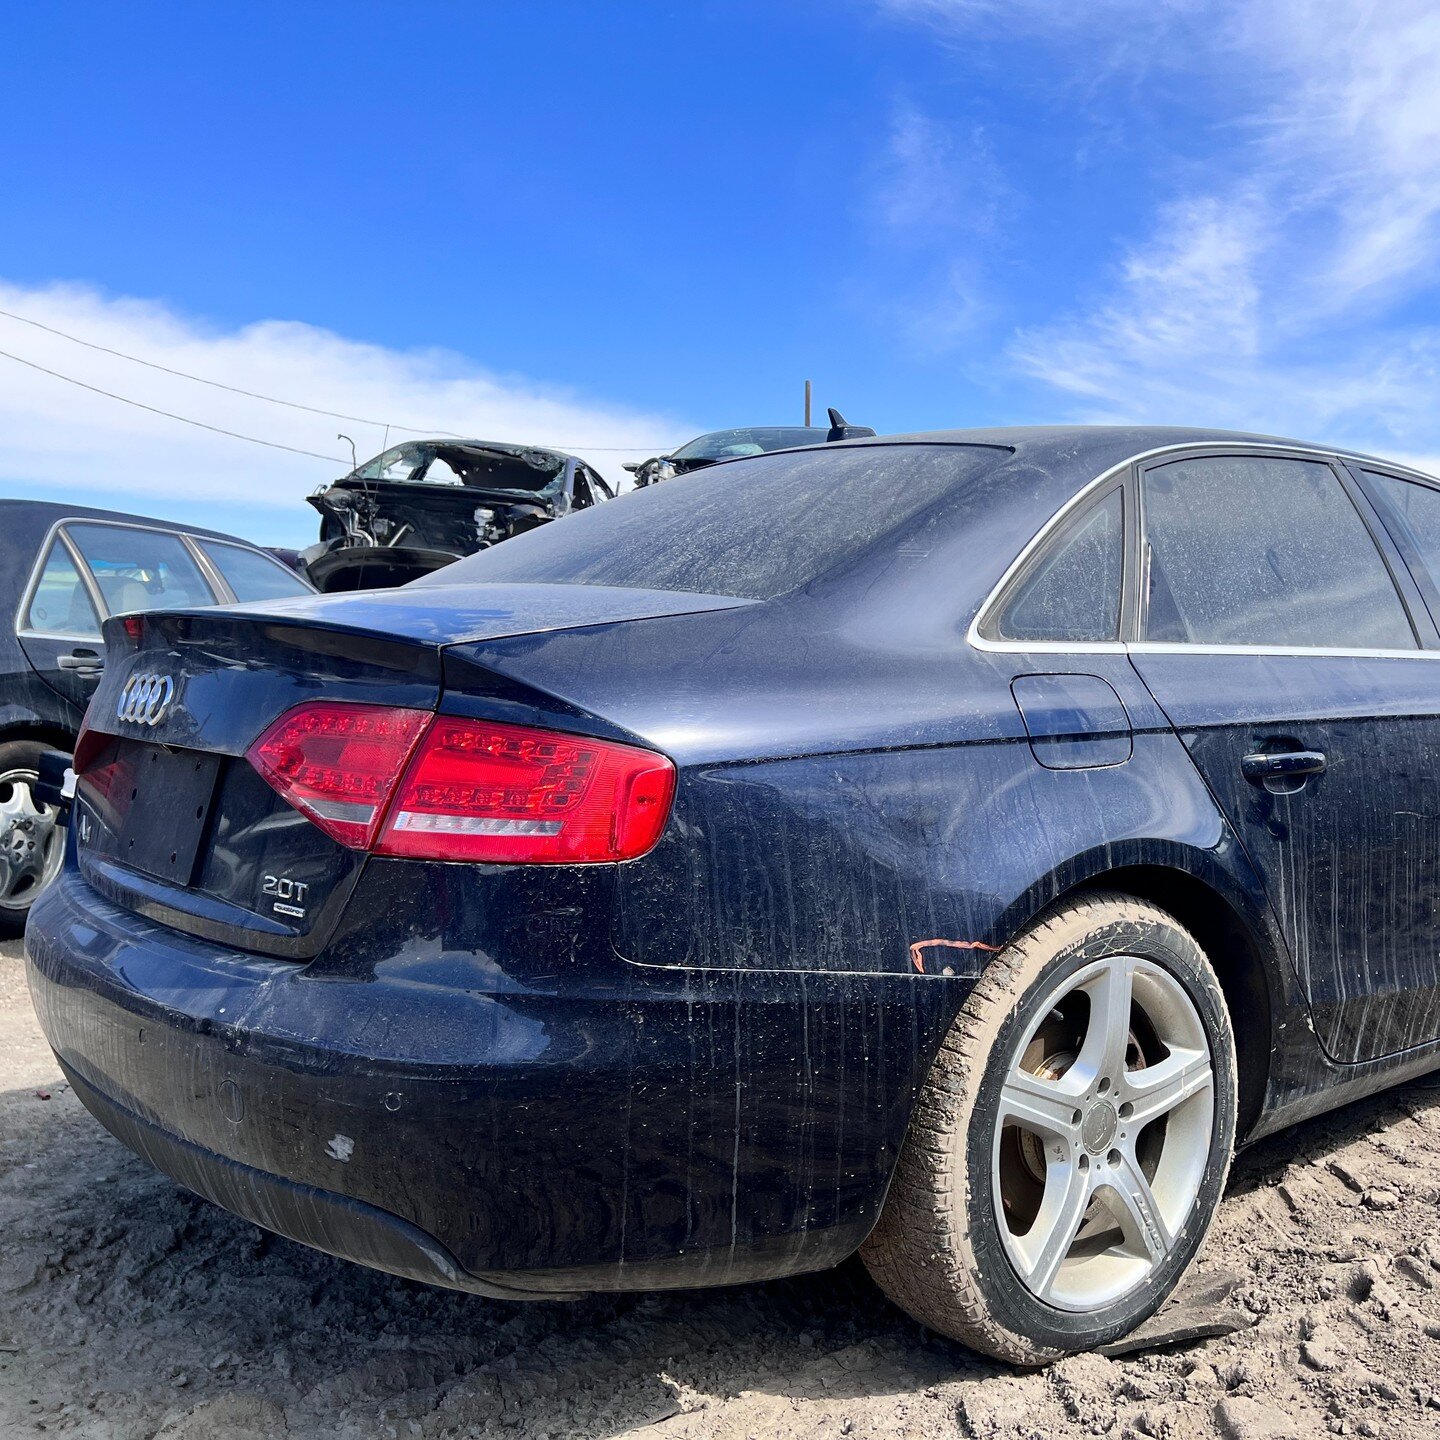 2011 AUDI A4 PREMIUM PRESTIGE 2.T *FOR PARTS* - 4WD, AUTOMATIC TIPTRONIC TRANSMISSION, 4 CYCLINDER , BLUE (Z5A), KMS:269574, VIN:WAUKFCFL6BN034621

We offer contactless delivery and are more than willing to accommodate your needs.
Why pick your part 